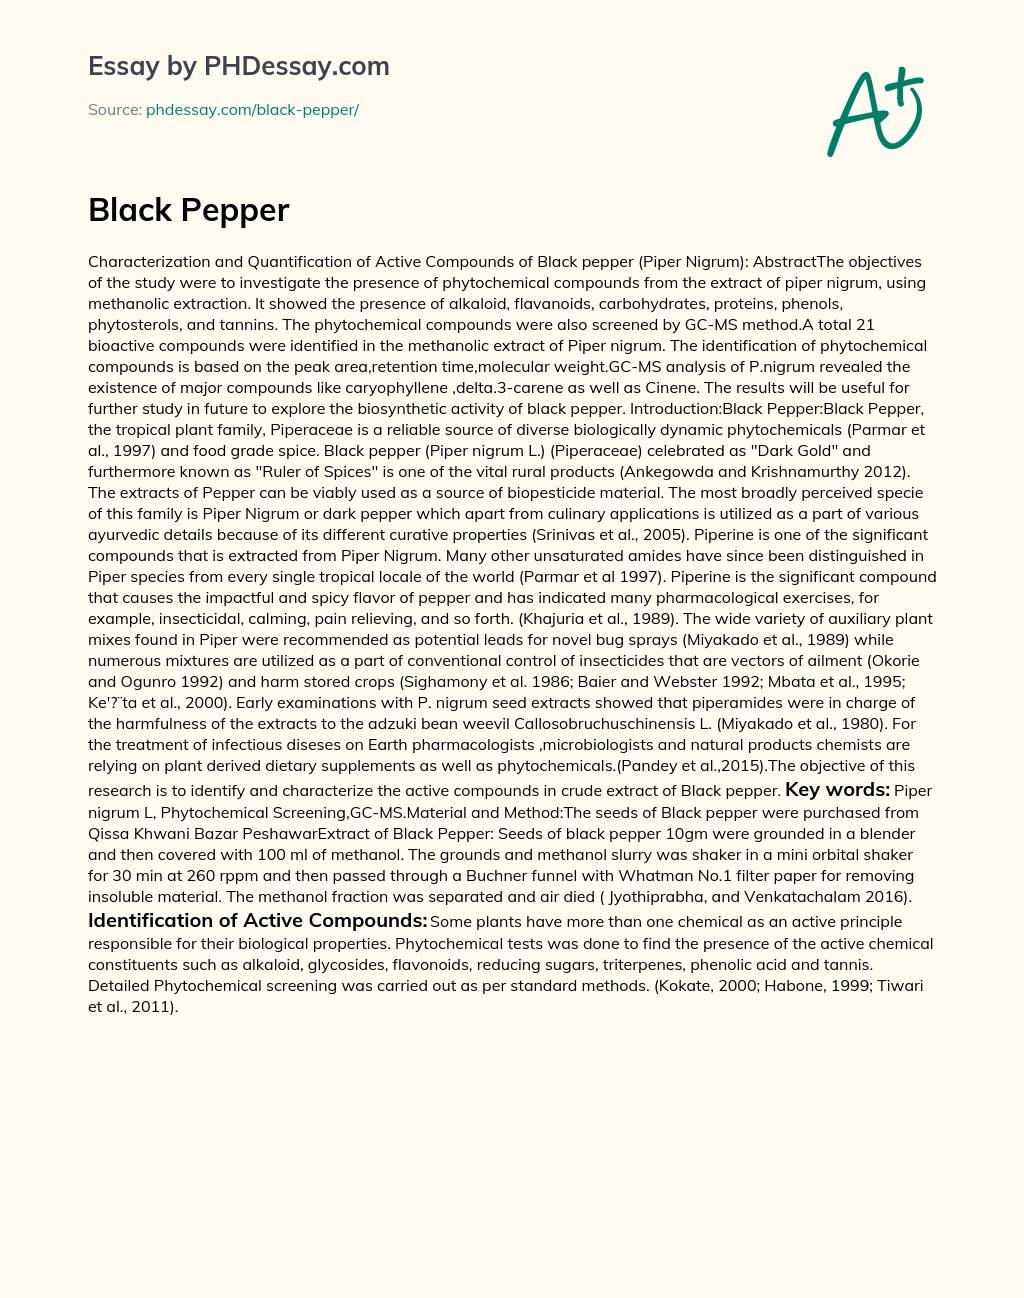 Identification and Quantification of Active Compounds in Black Pepper essay